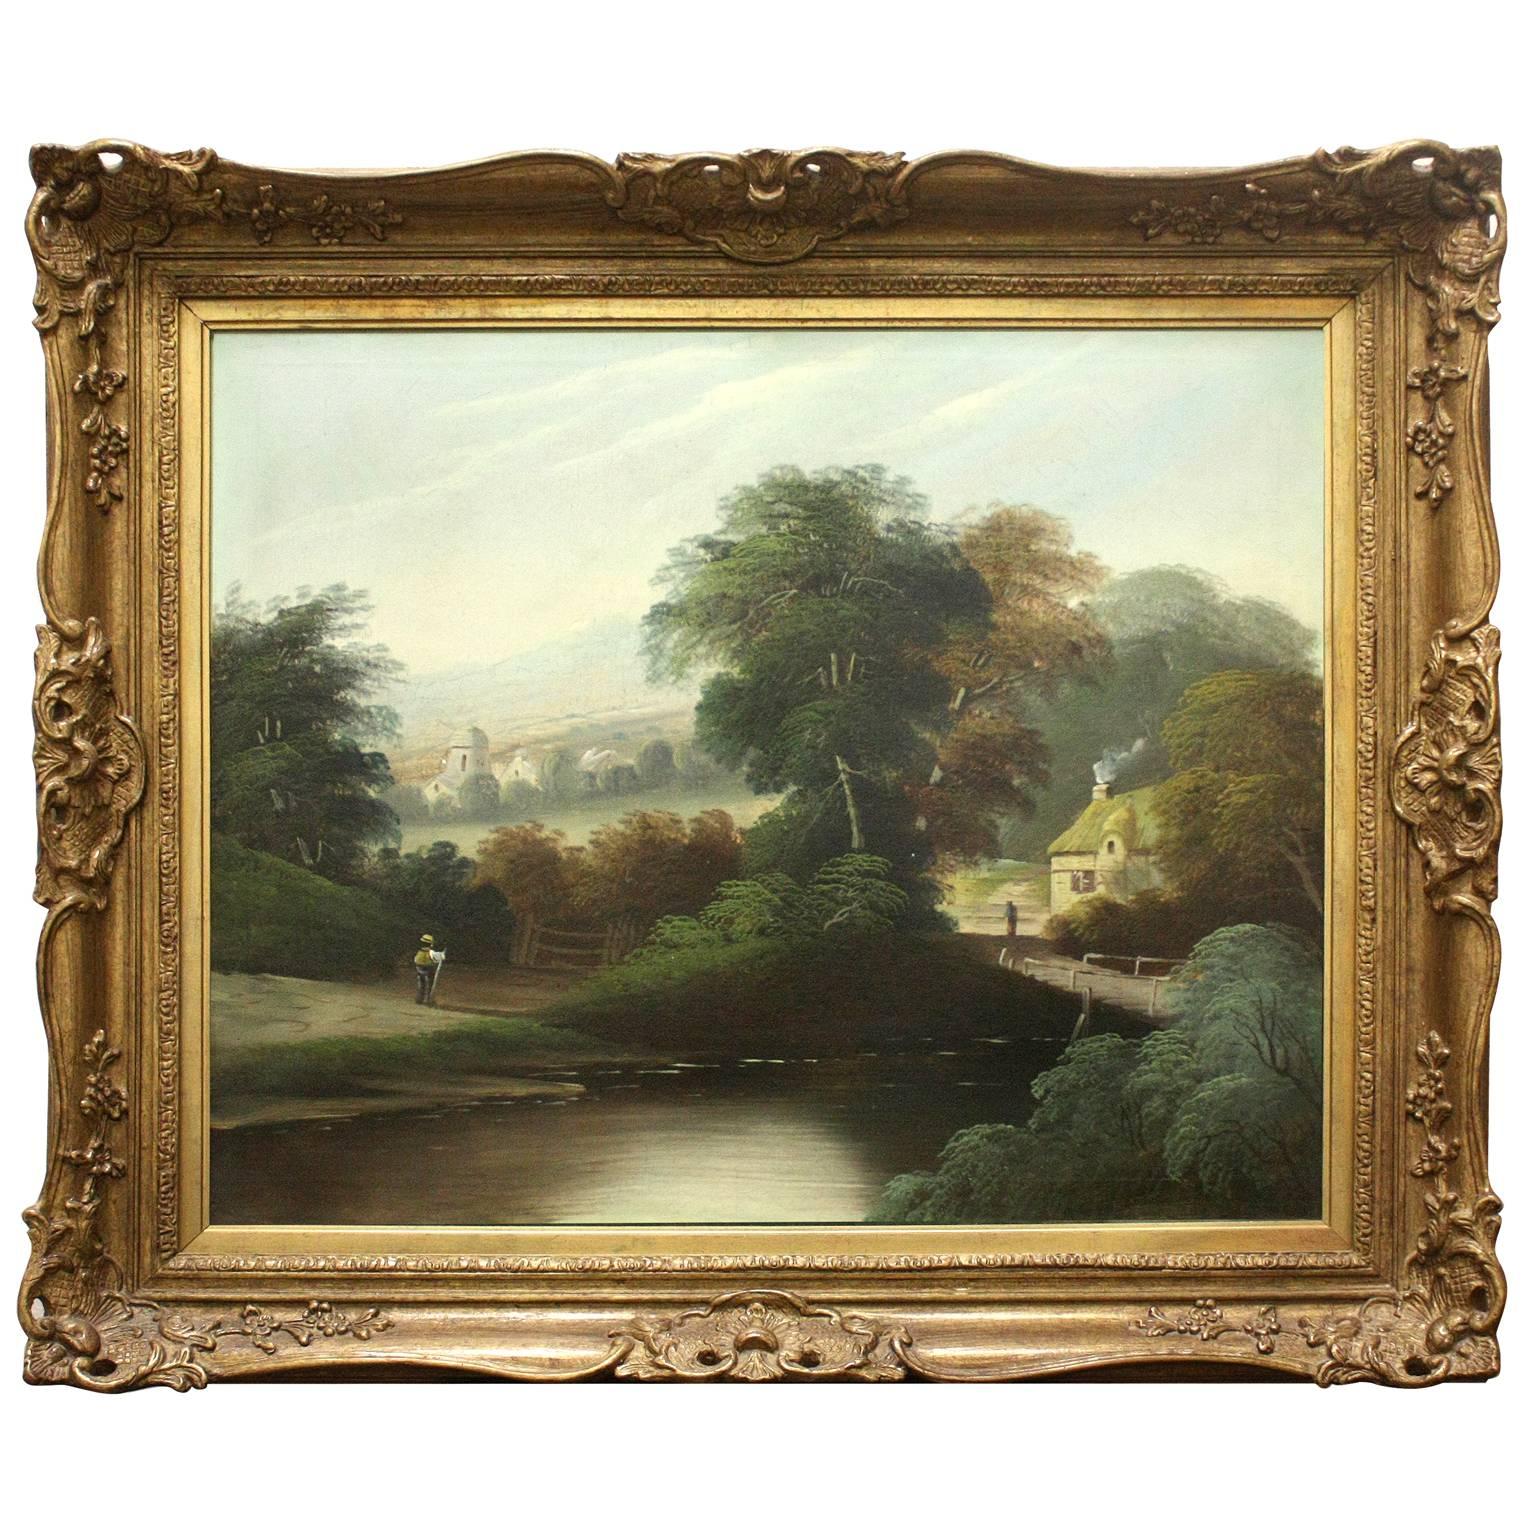 Pair of 19th century English landscape paintings.